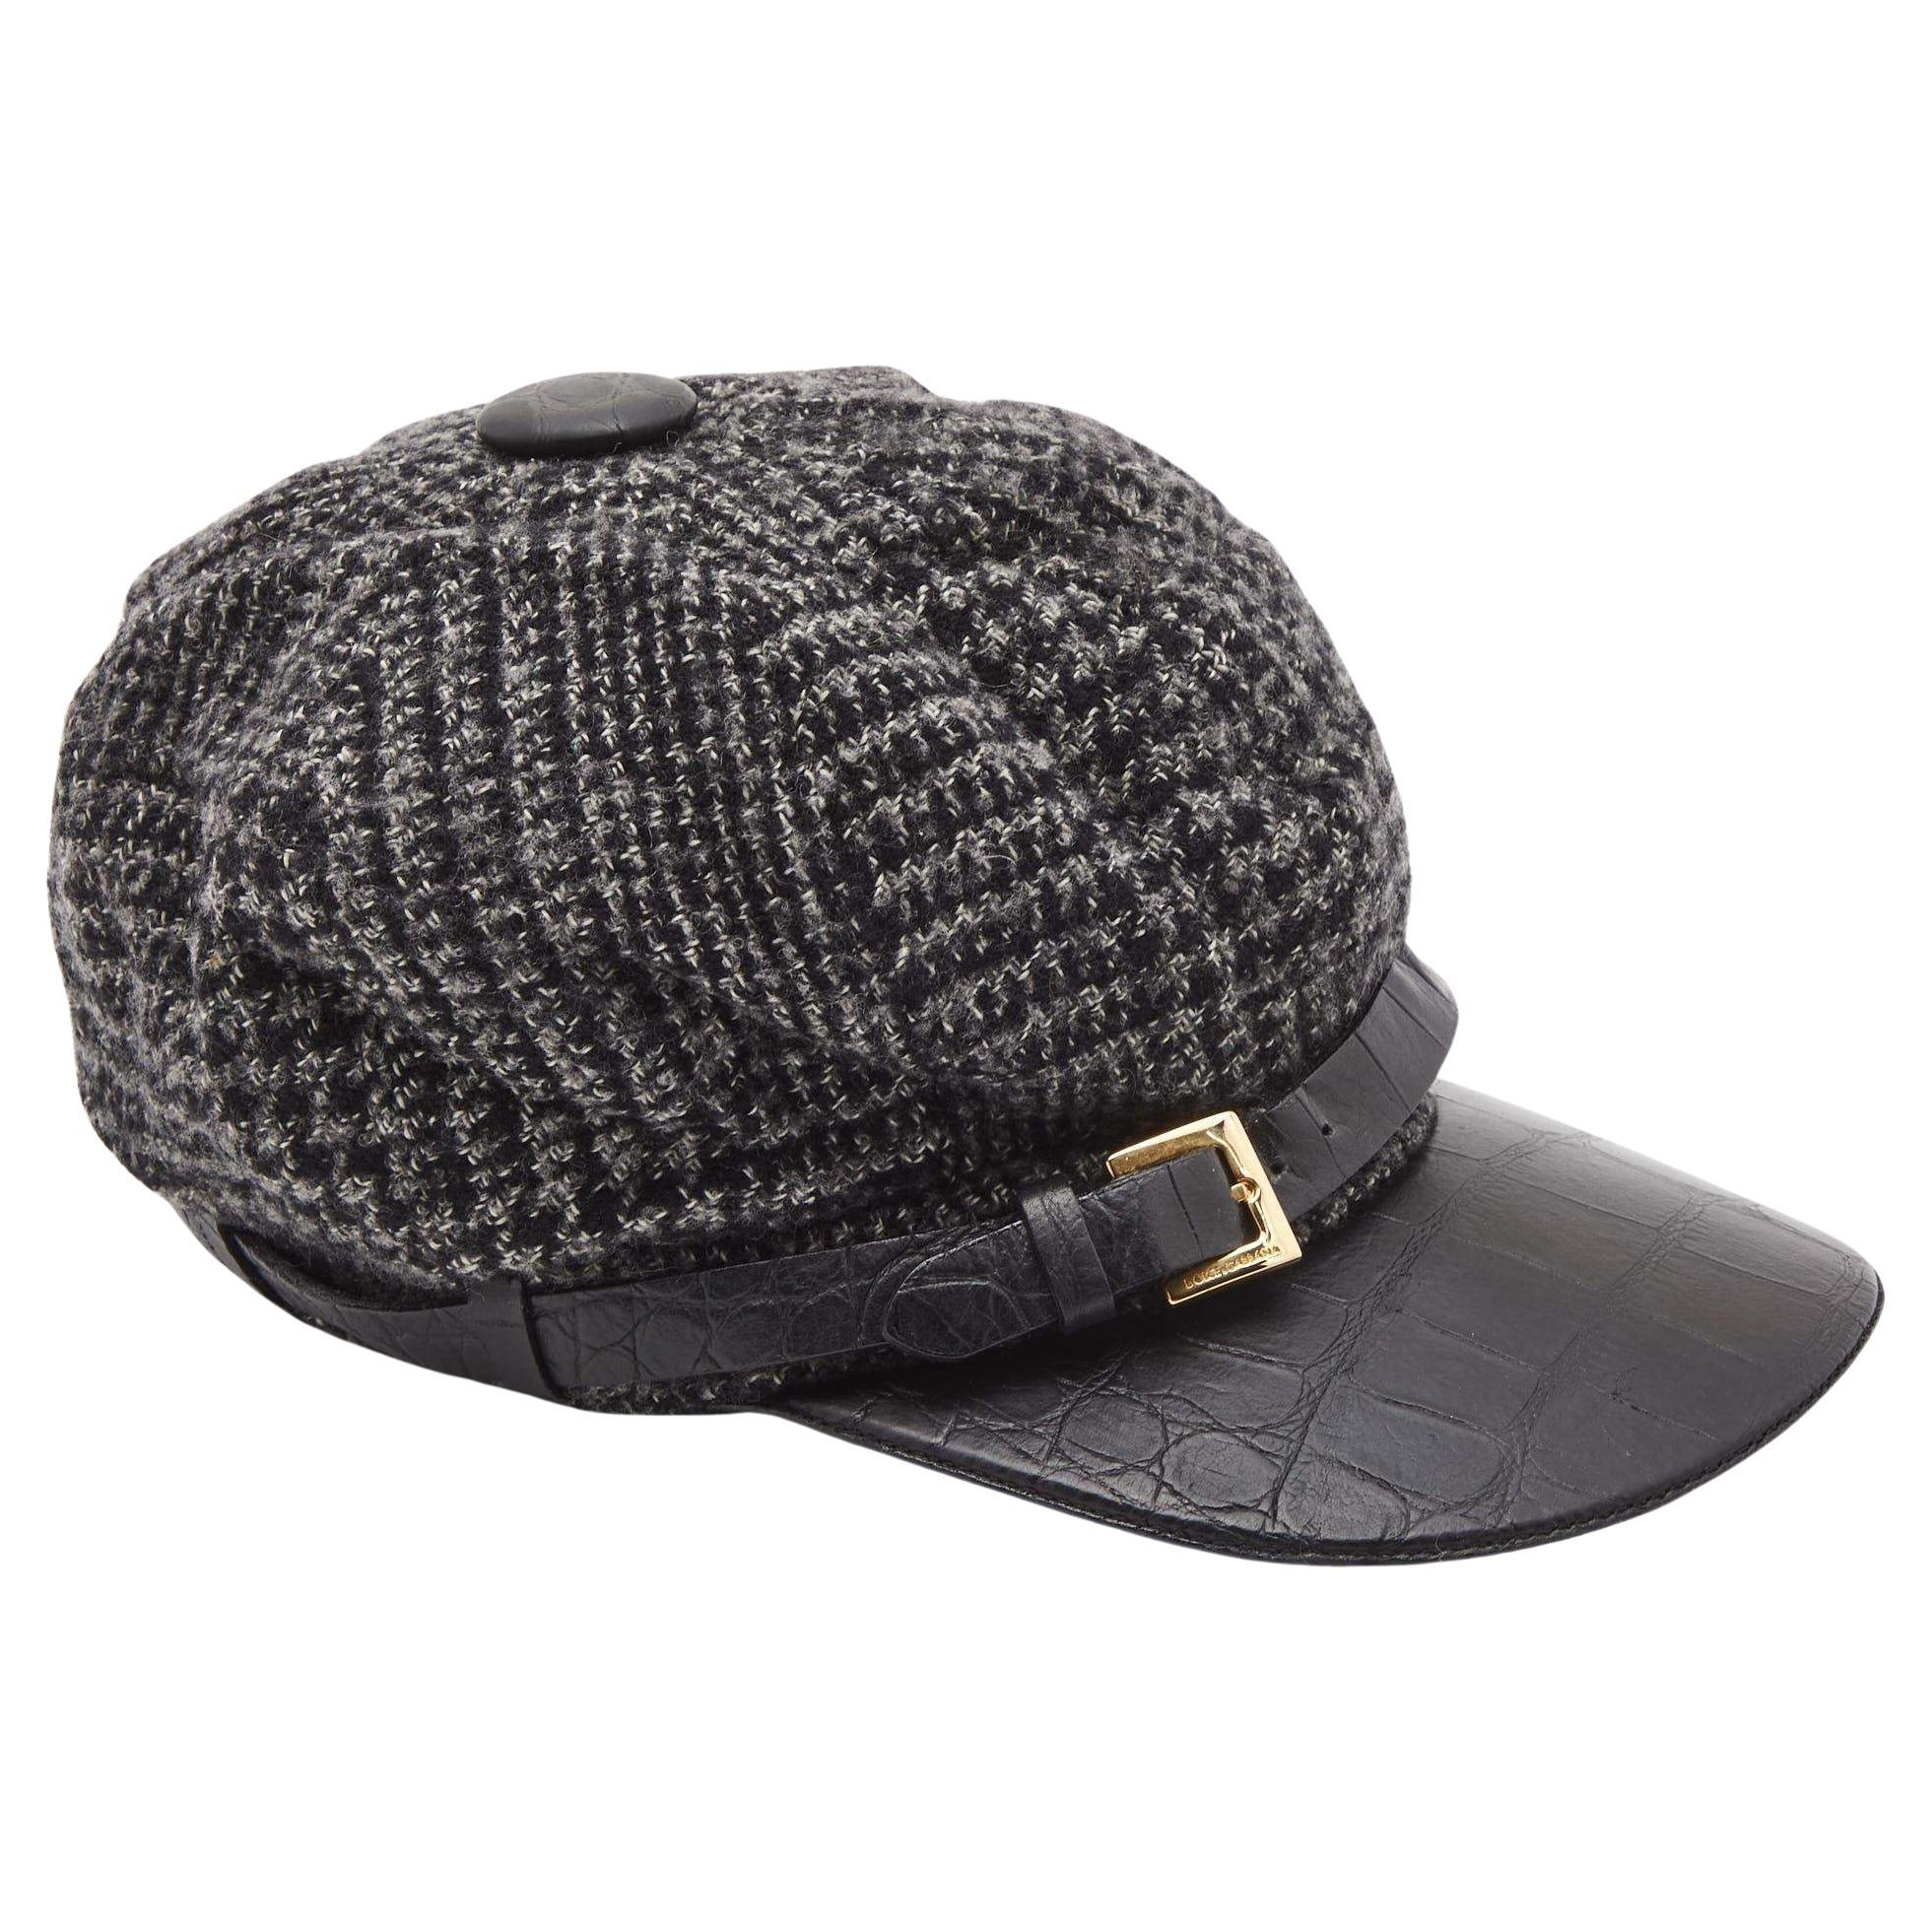 Dolce & Gabbana Black Wool Knit Croc Embossed Leather Baseball Cap Size 57 For Sale